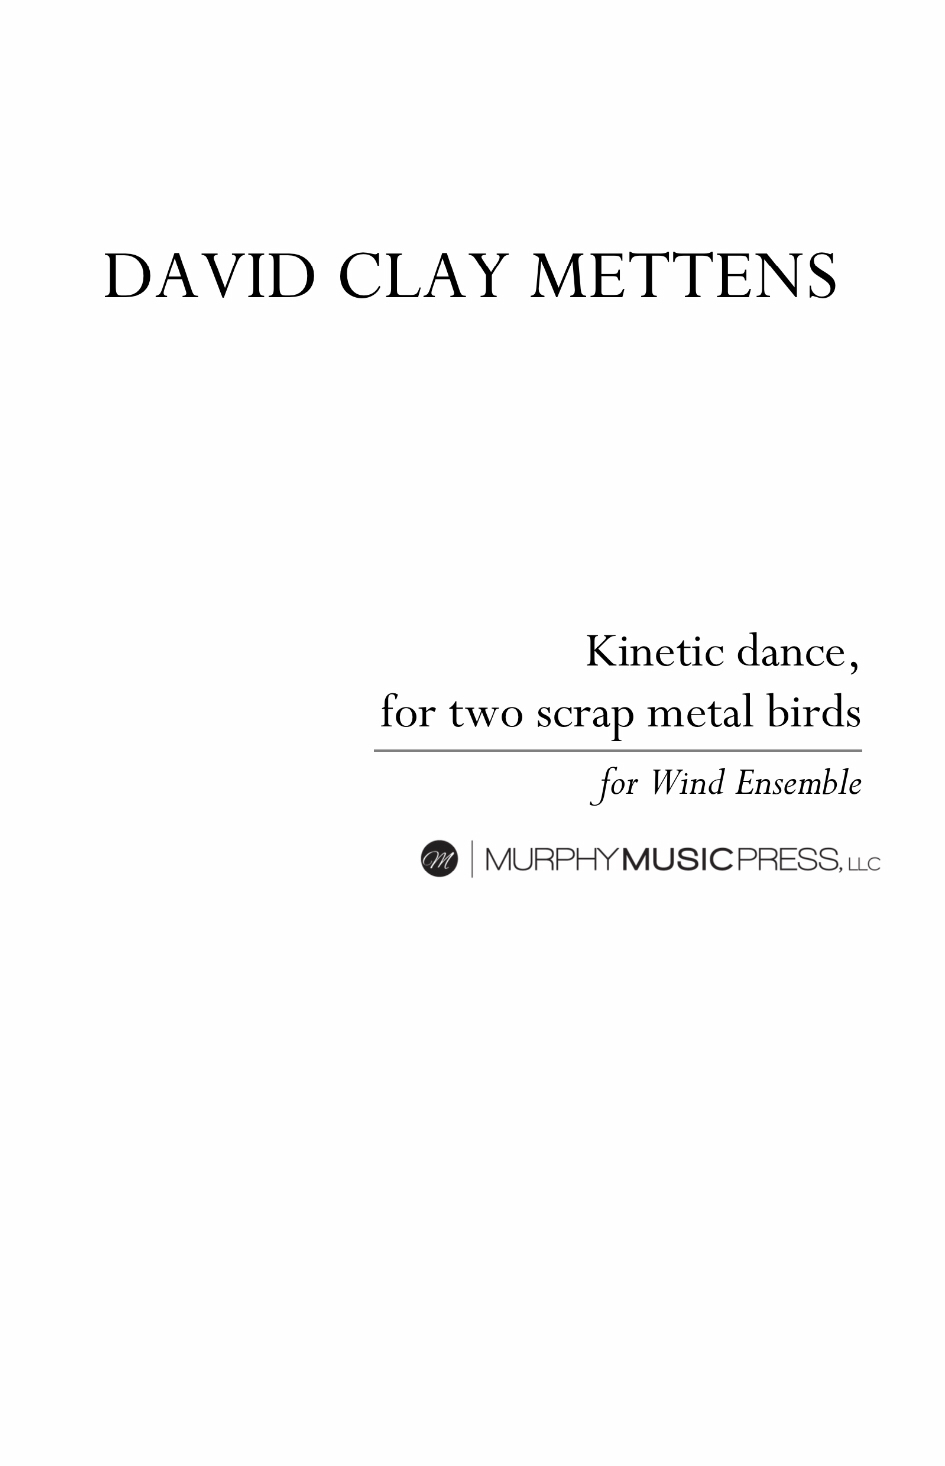 Kinetic Dance For Two Scrap Metal Birds by David Clay Mettens